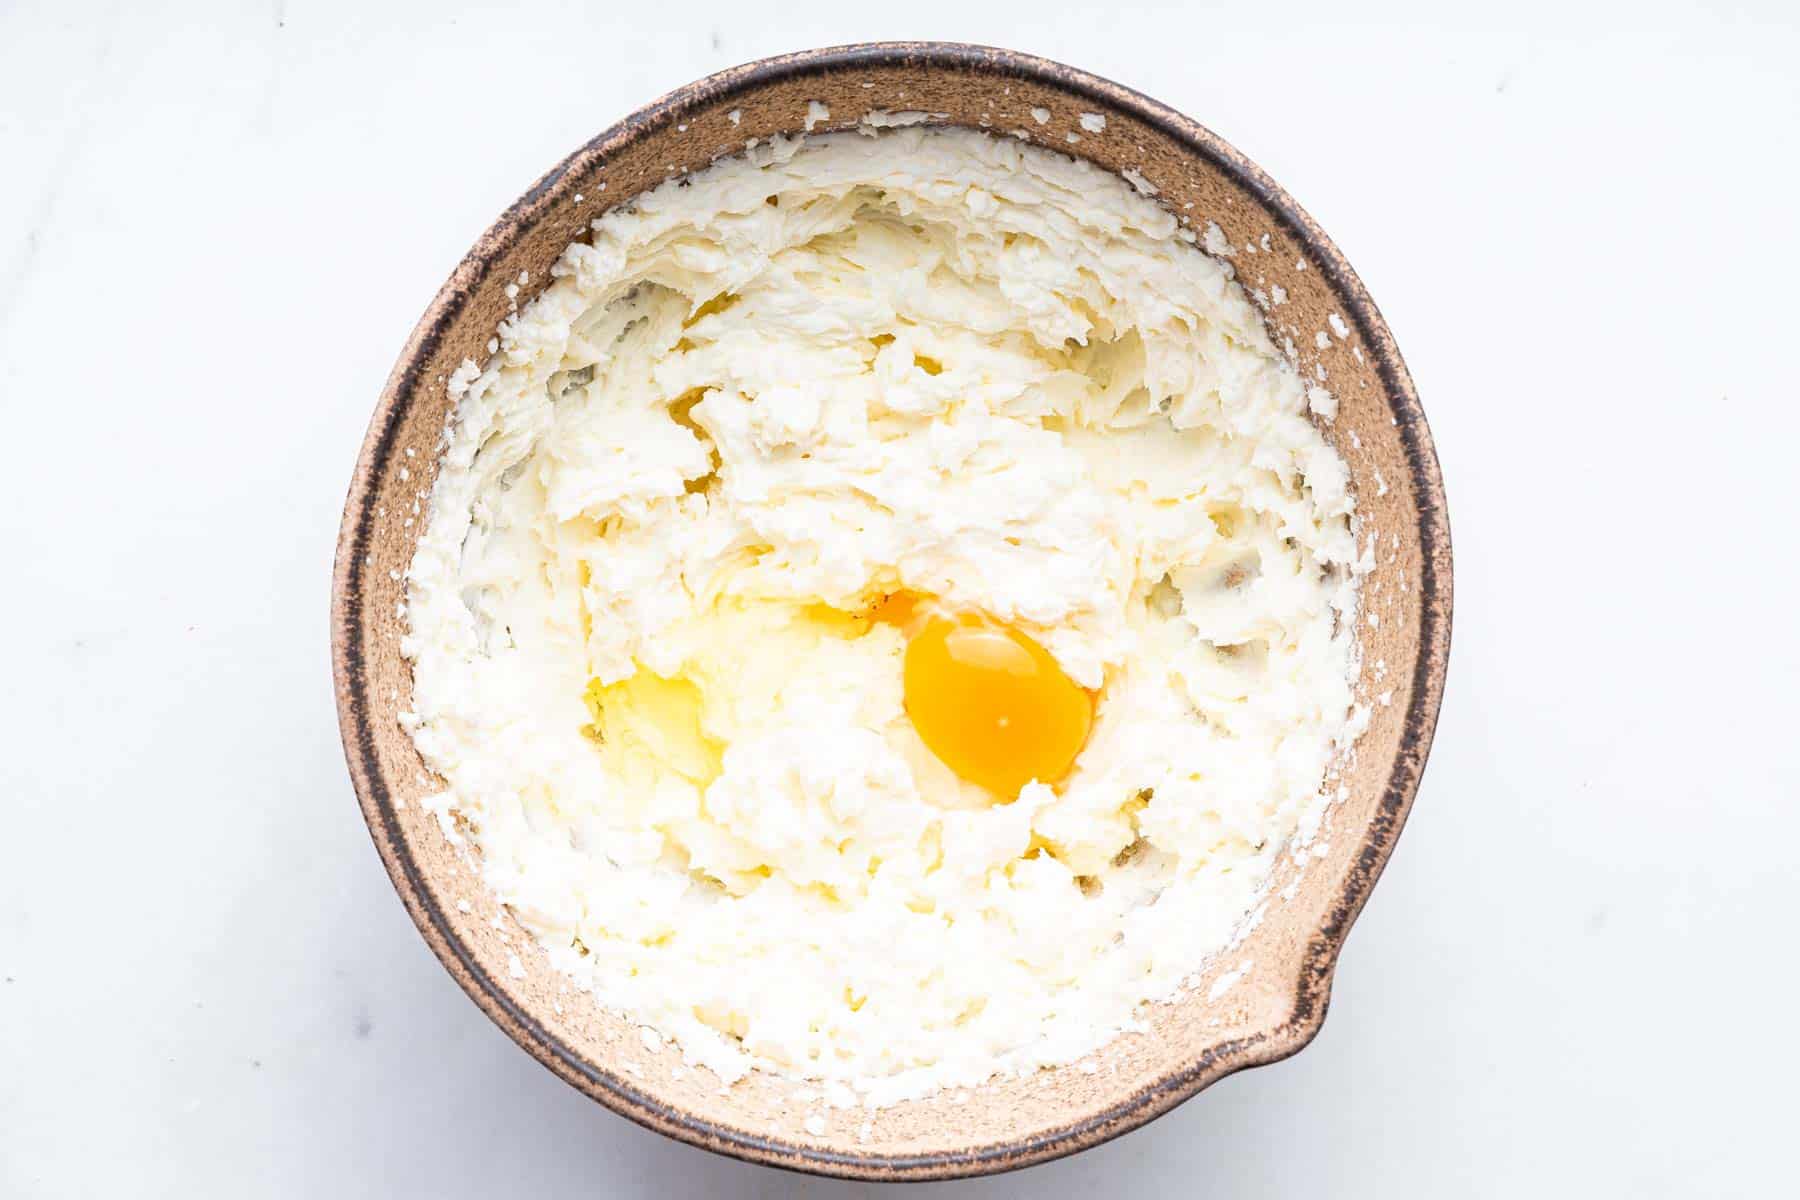 White fluffy batter in brown bowl with egg.